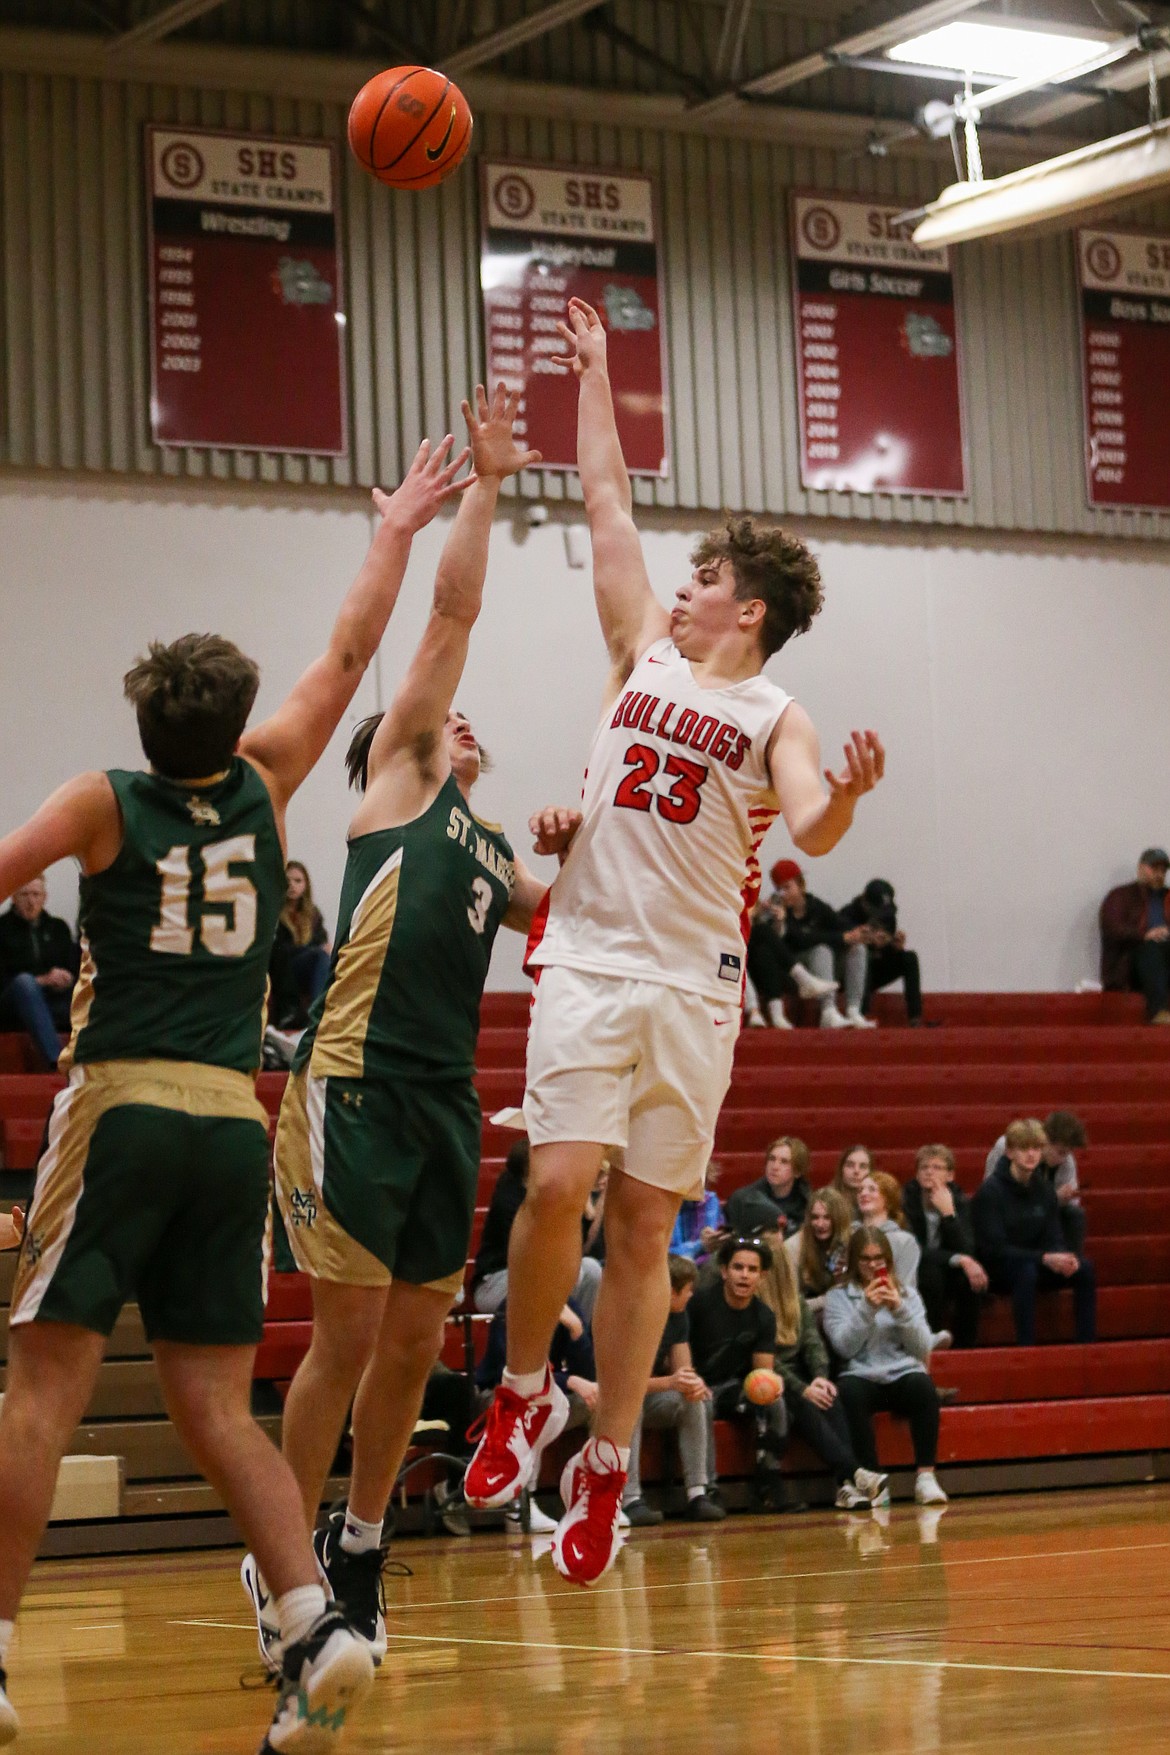 Parker Childs attempts a shot over a St. Maries defender Tuesday.